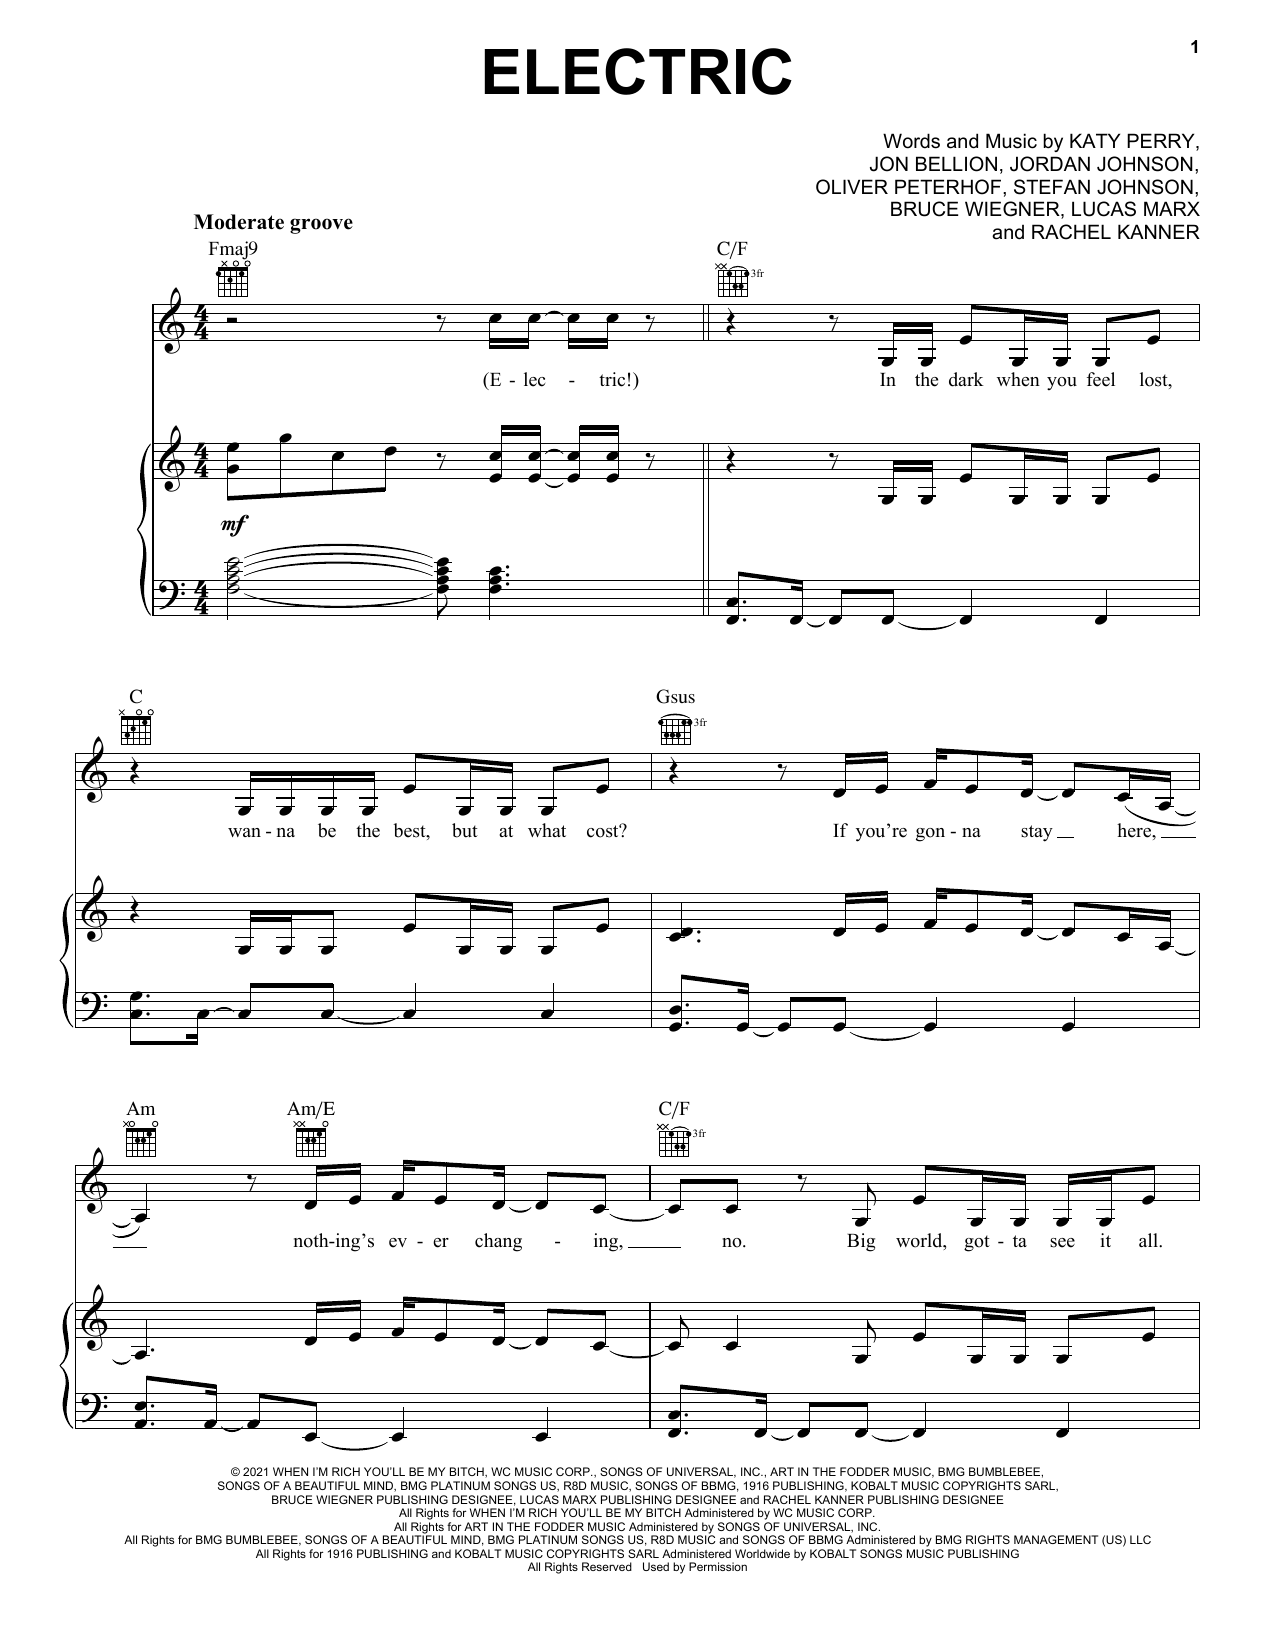 Download Katy Perry Electric Sheet Music